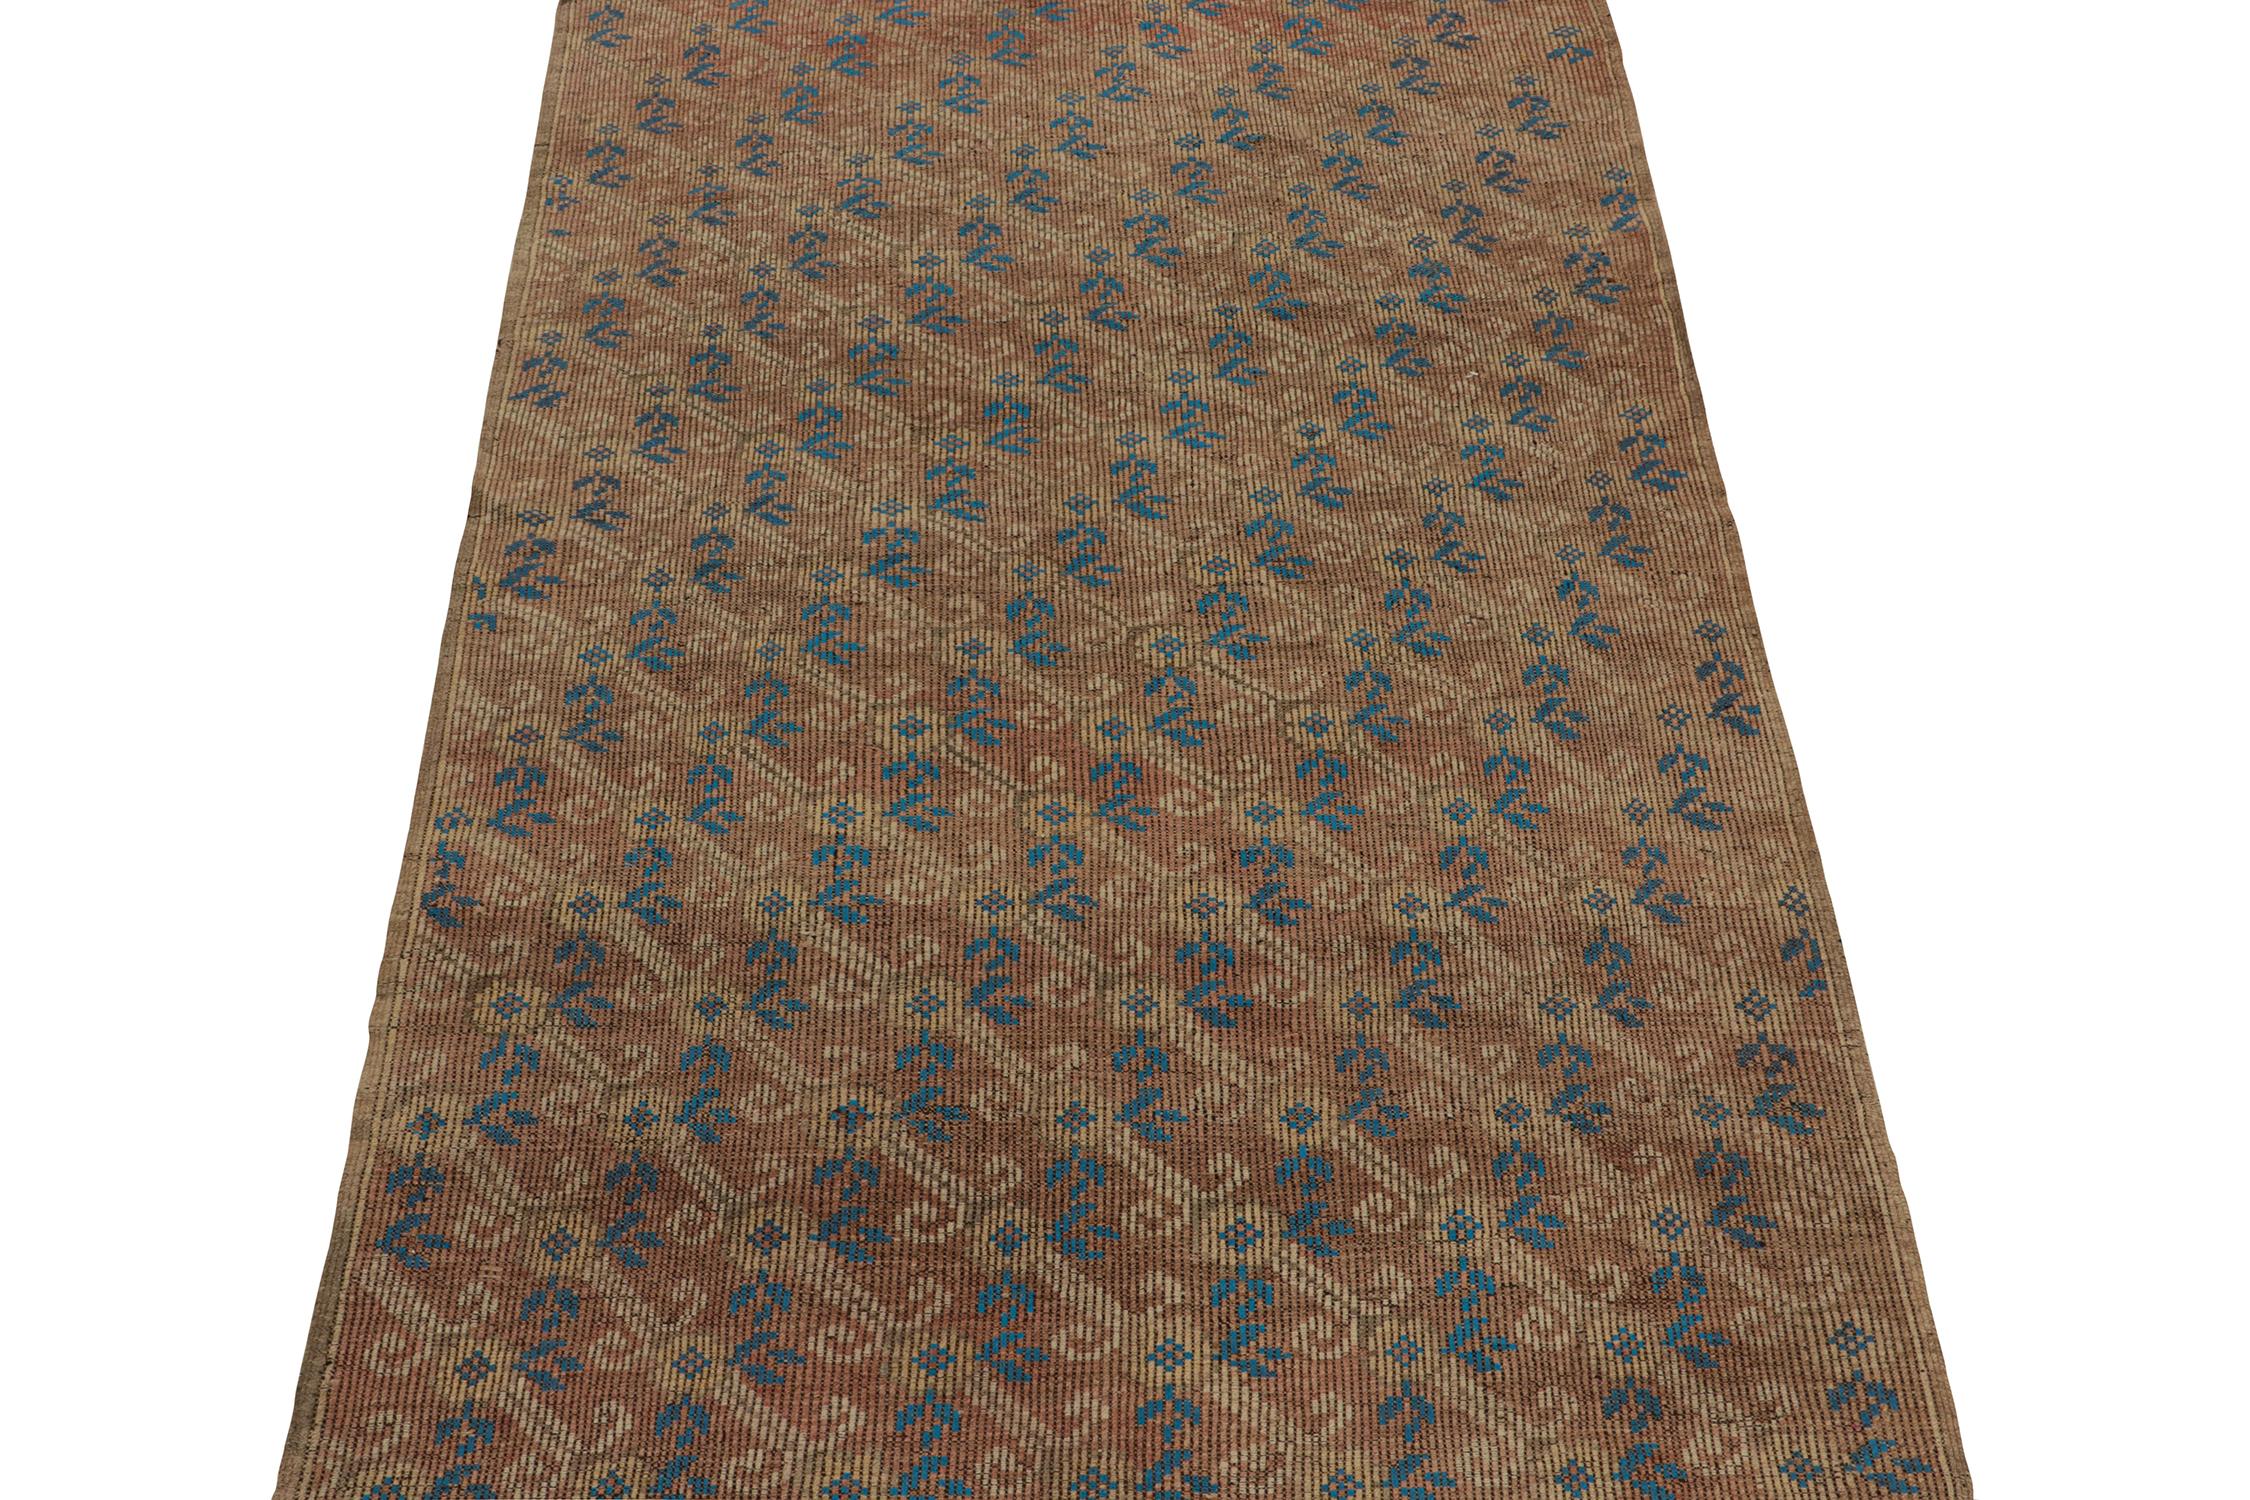 Tribal Vintage Chaput Style Kilim in Brown Pink Undertone & Blue Accents by Rug & Kilim For Sale